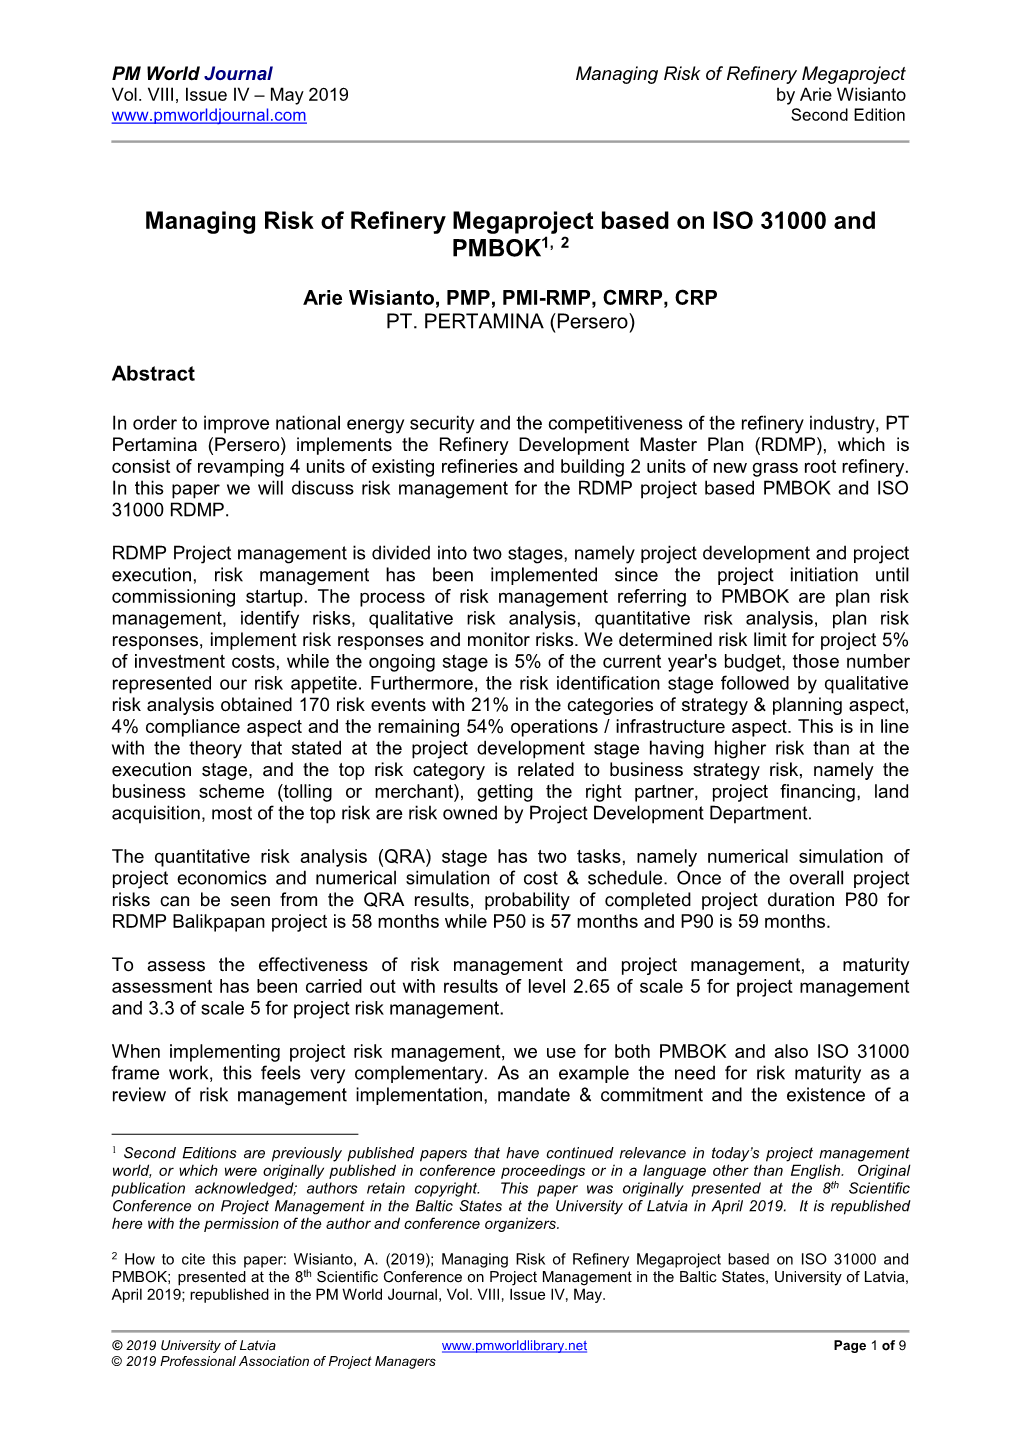 Managing Risk of Refinery Megaproject Based on ISO 31000 and PMBOK1, 2